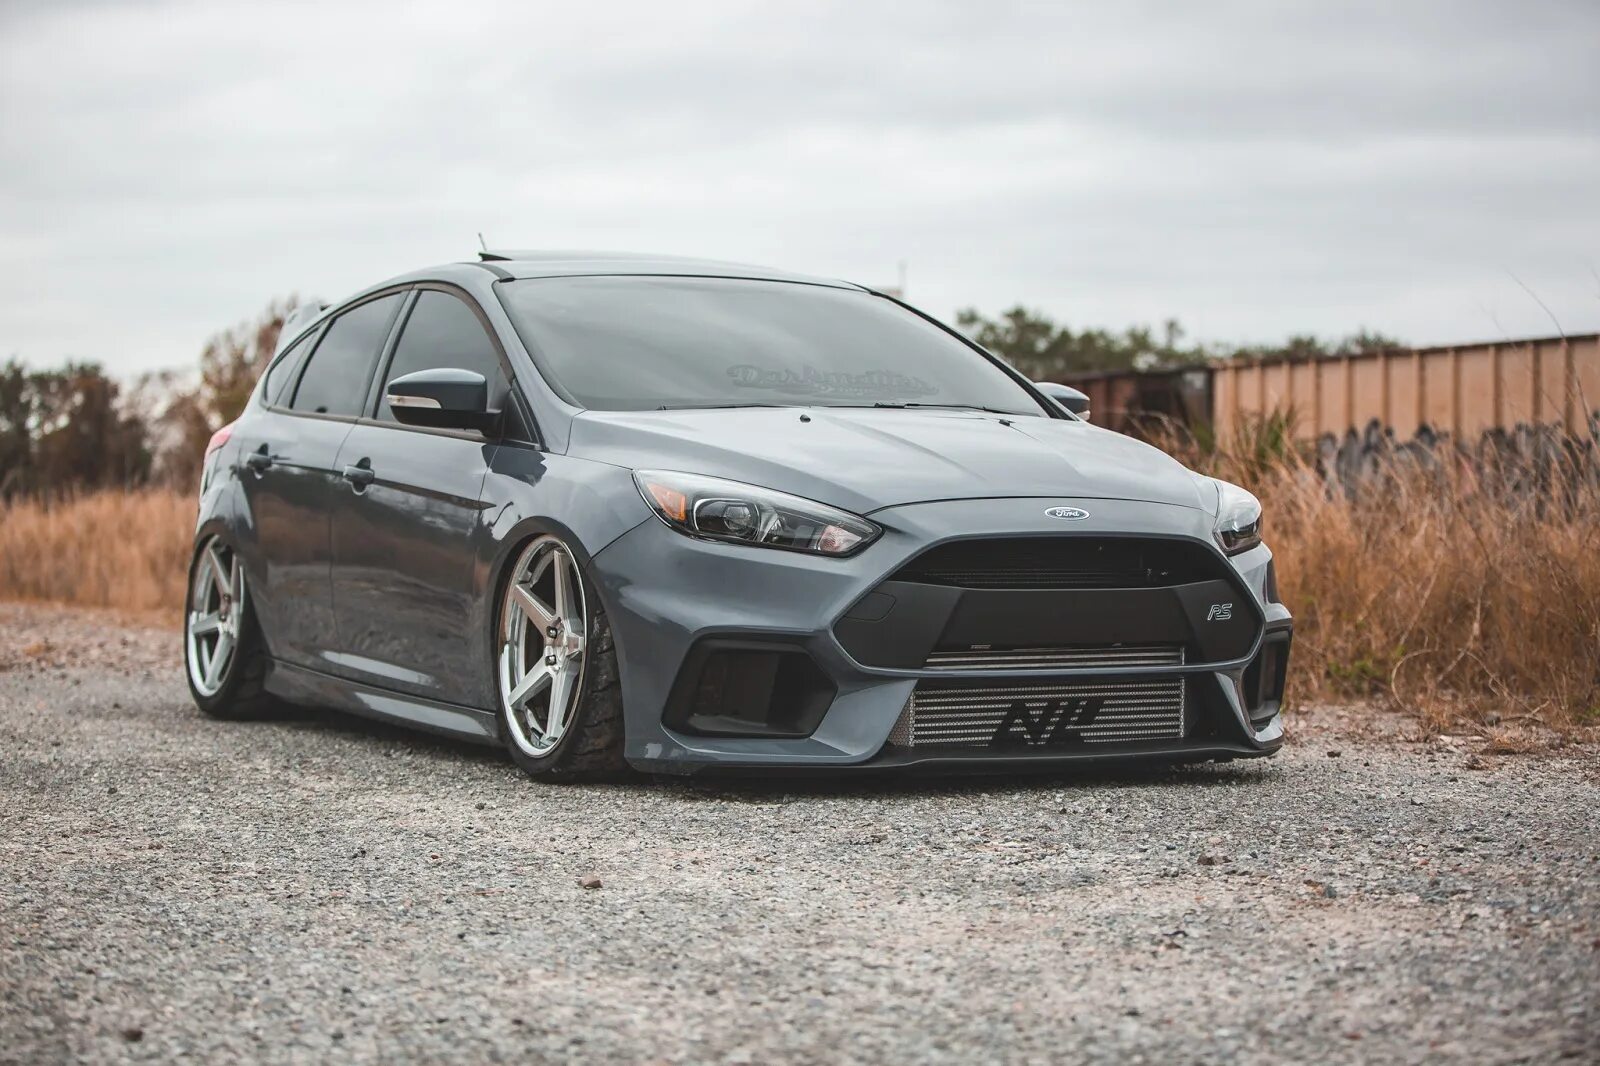 Ст тюнинг. Ford Focus 3 Tuning. Ford Focus 2 RS Tuning. Ford Focus 3 RS Tuning. Тюнингованный Ford Focus 3.